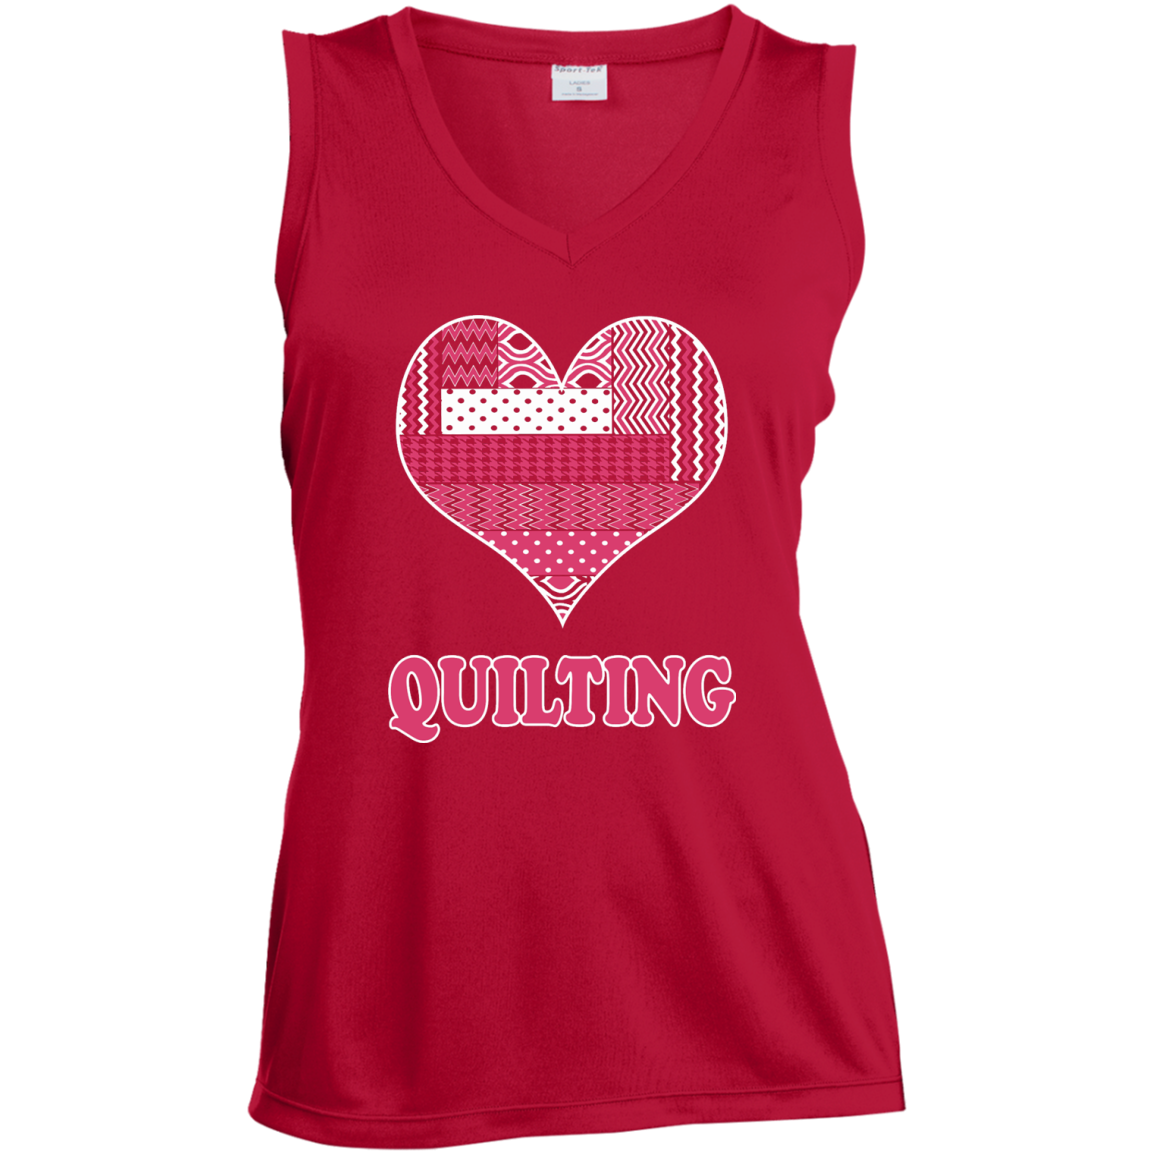 Heart Quilting Ladies Sleeveless V-Neck - Crafter4Life - 4